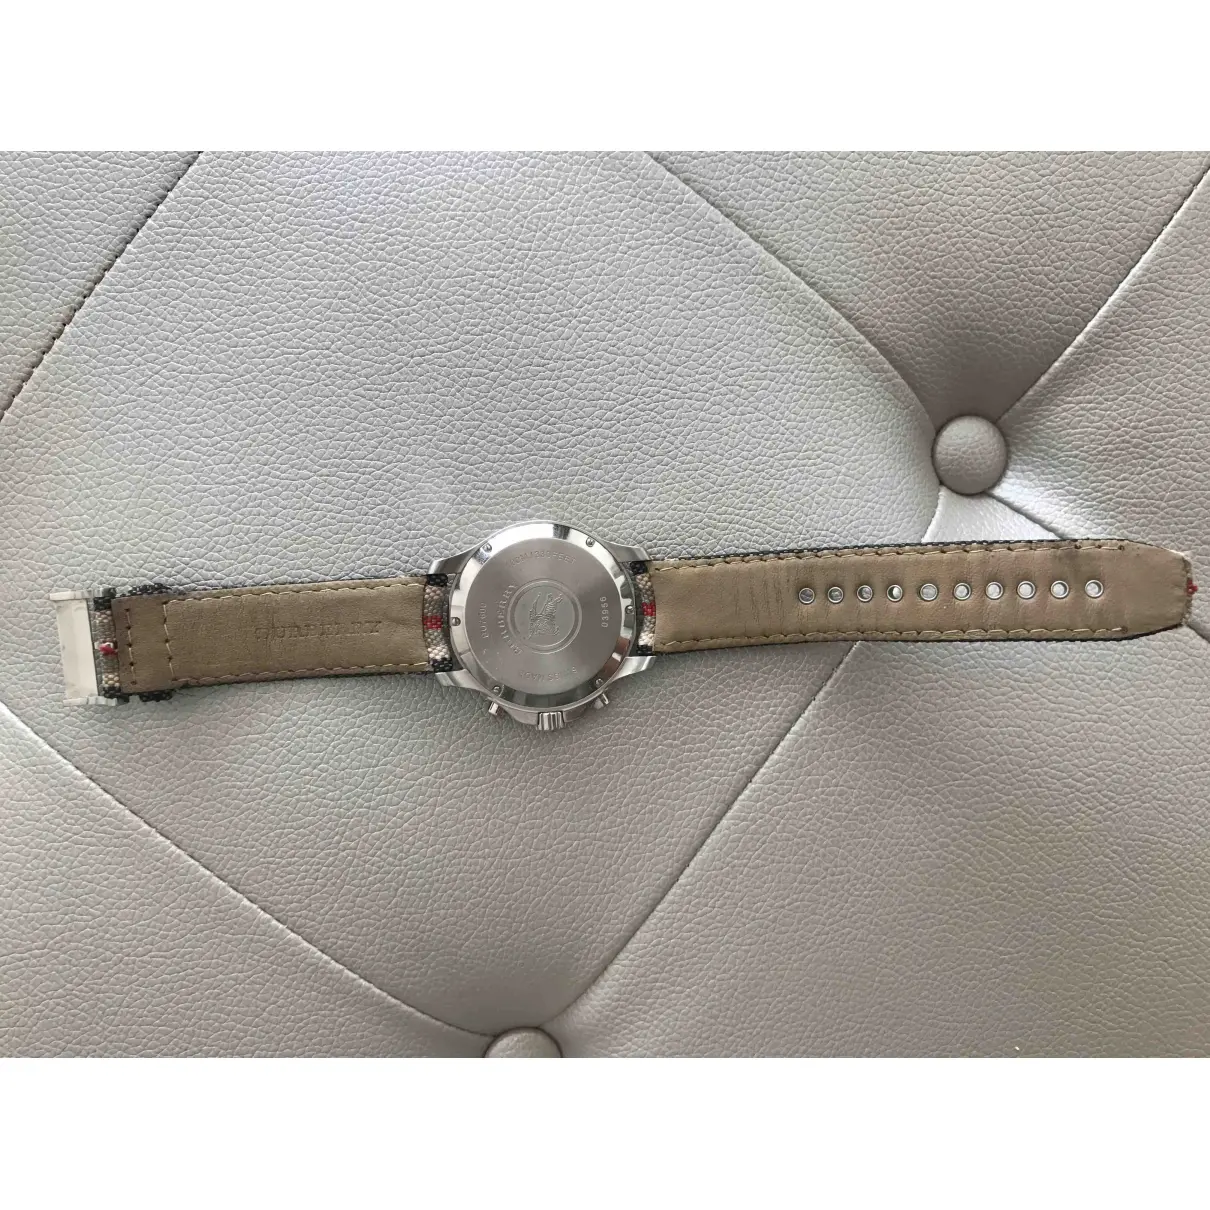 Burberry Watch for sale